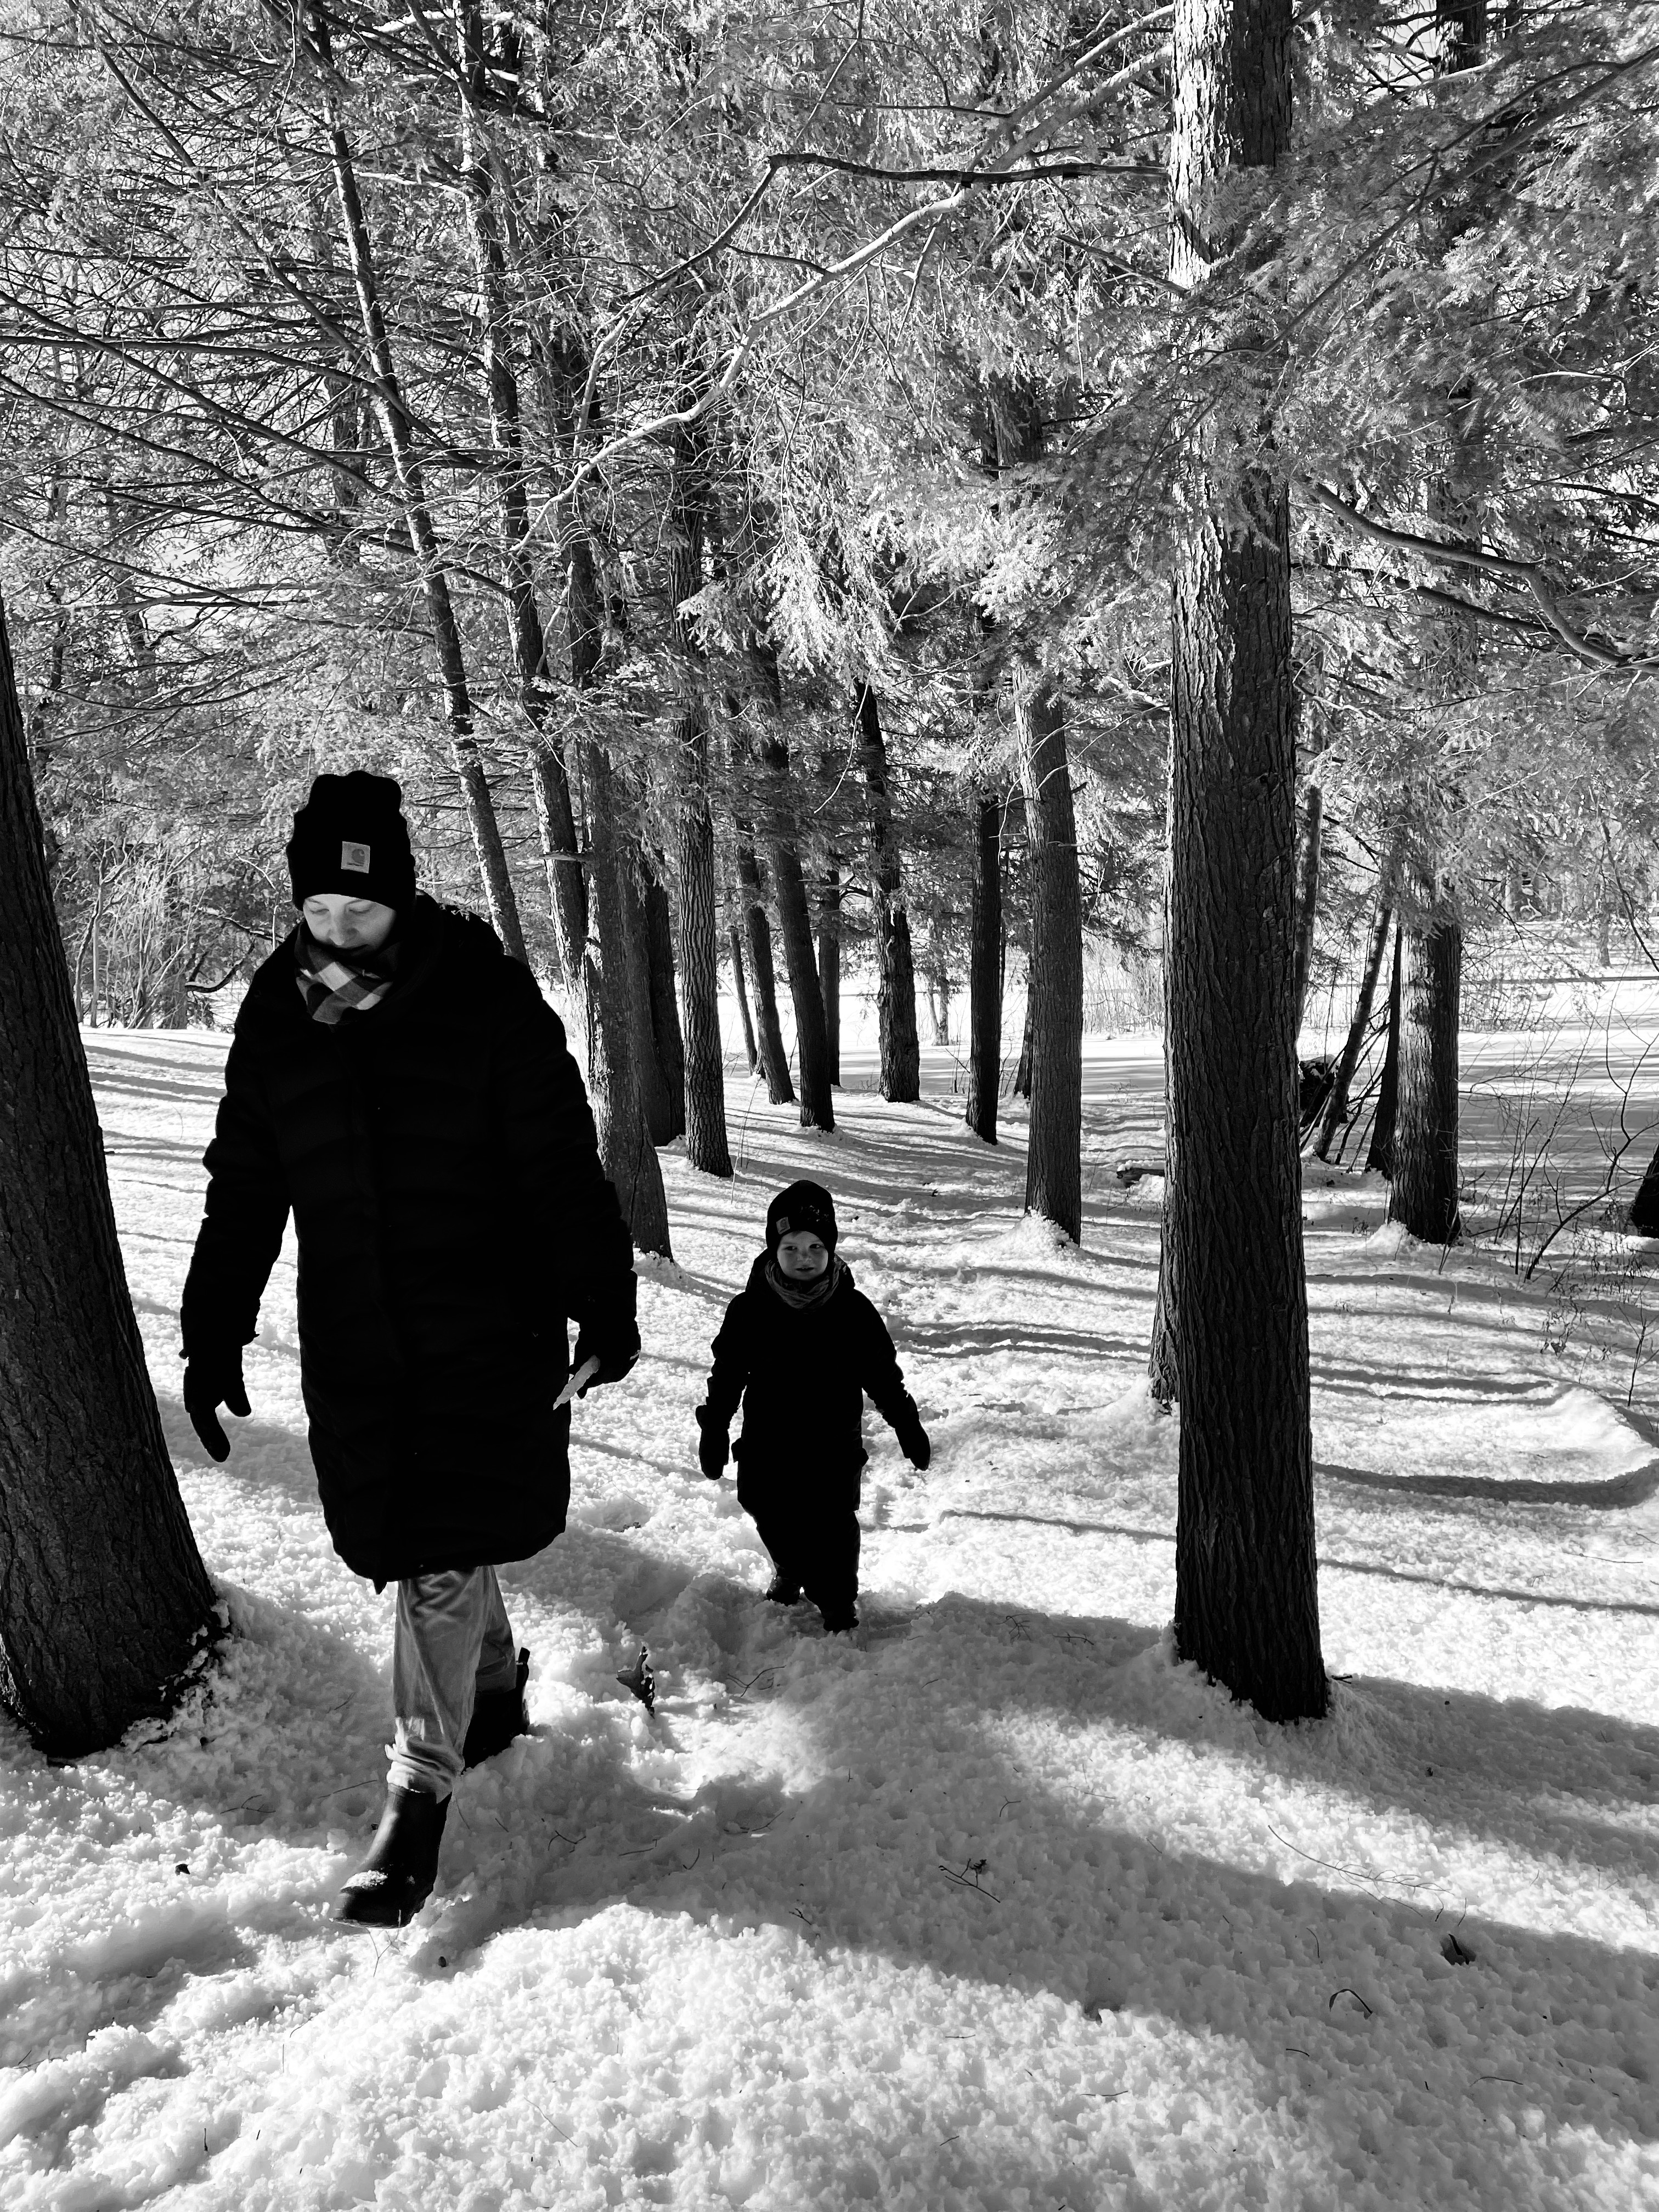 Jordan's wife, Dana, and youngest child, Leor, hiking through snow.